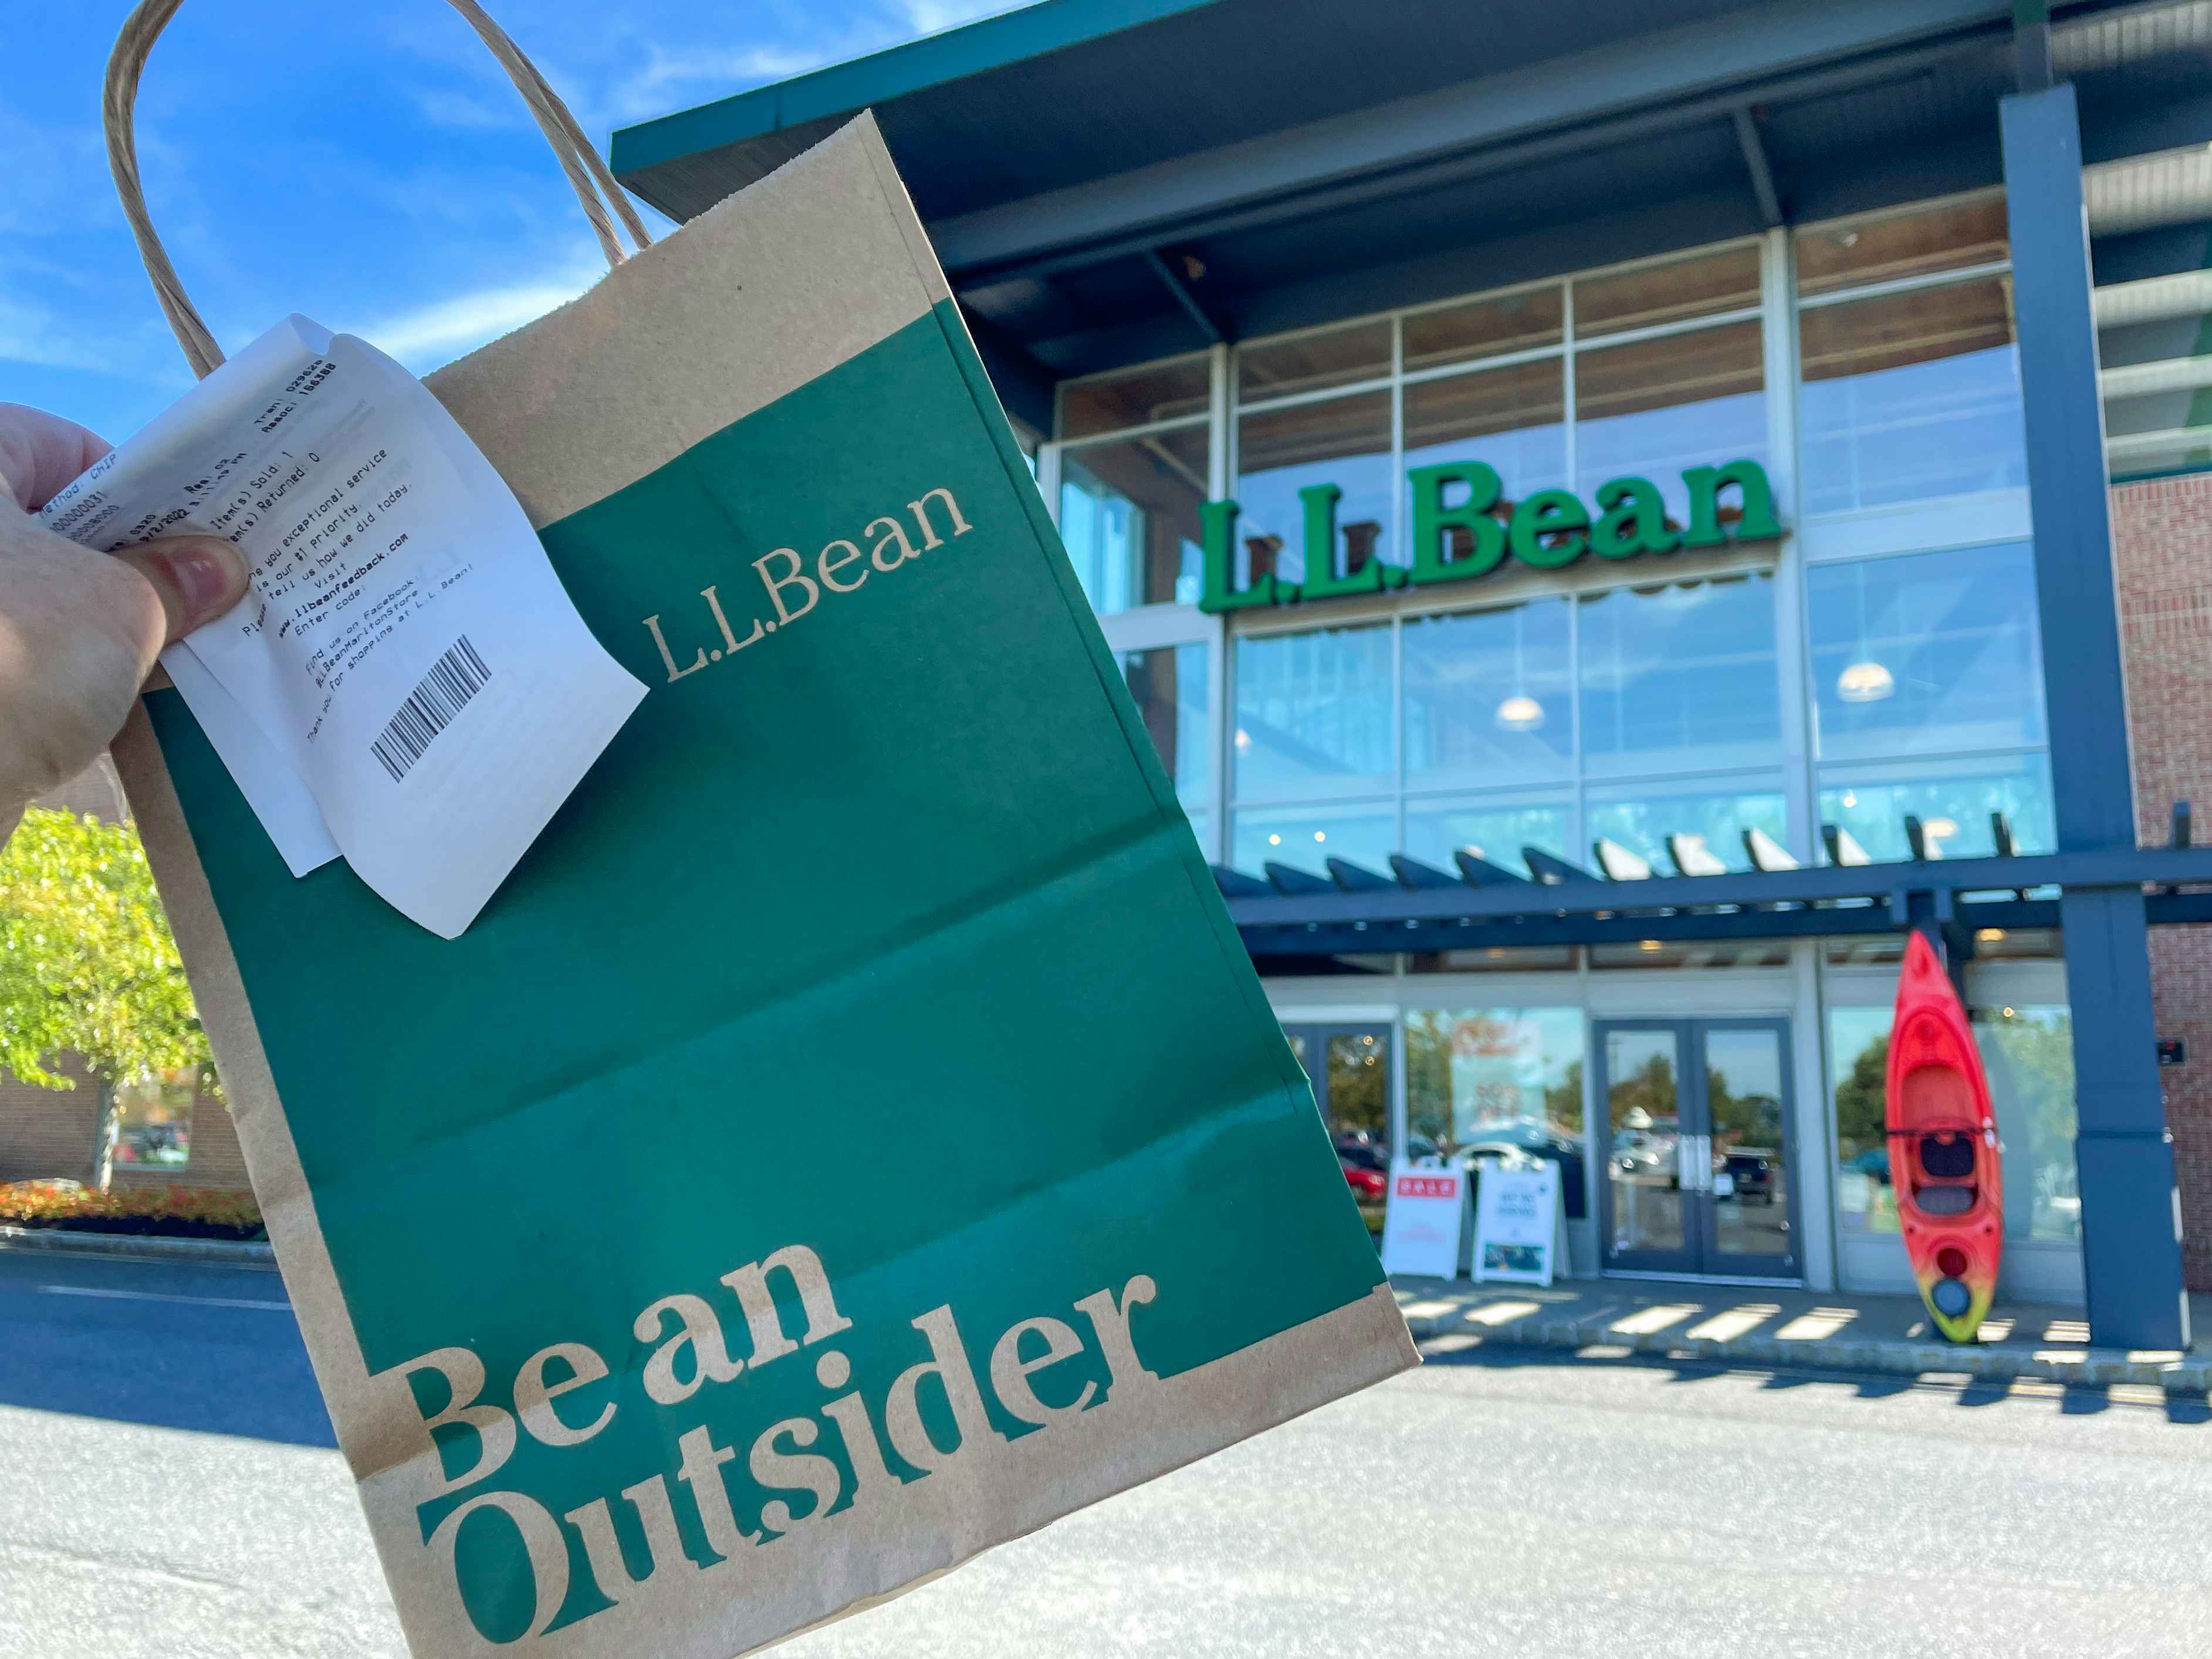 A person's hand holding up a L.L. Bean bag and receipt outside of an L.L.Bean store.